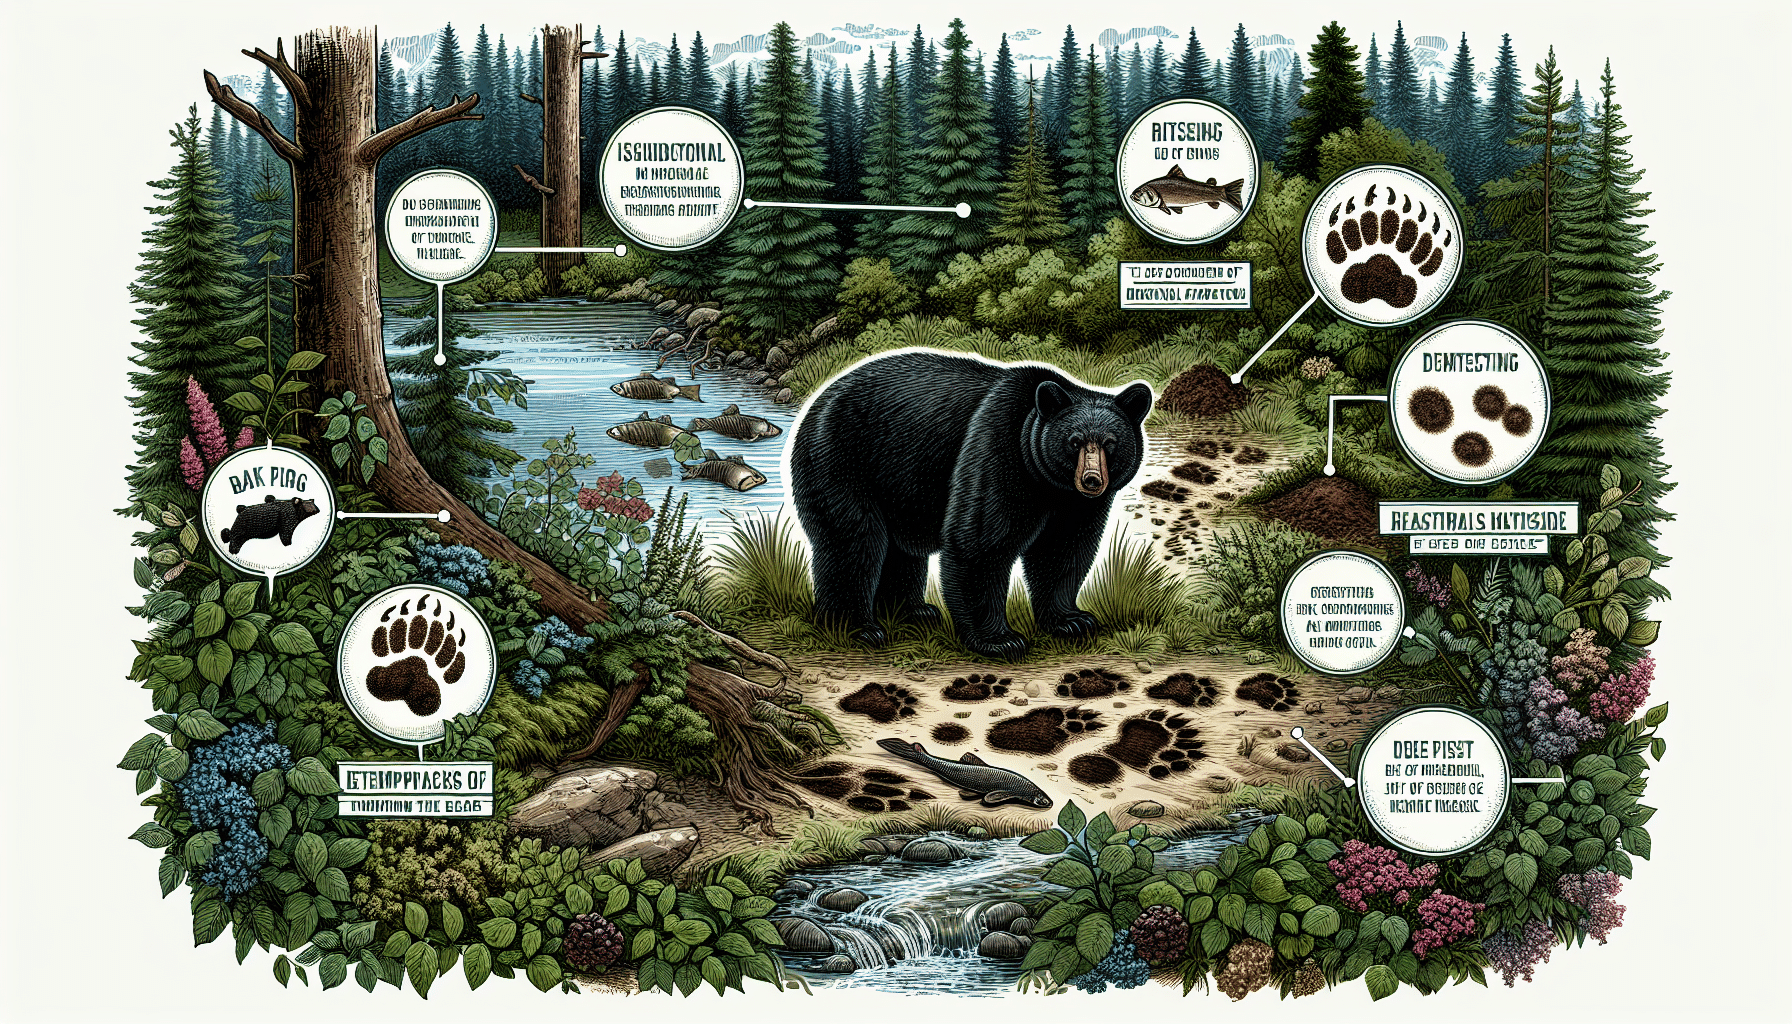 Illustrate an intriguing wildlife scene showcasing a Black Bear in its natural habitat, surrounded by signs of its typical diet. These signs could include paw prints, recent diggings in the earth, or remnants of fish or berries. Incorporate this scene into a lush forest environment with trees, shrubs, and a flowing river nearby. The bear can be depicted as observant and alert but not directly hunting or preying for its sense of peaceful coexistence. Abstain from introducing any human attributes, elements or text, keeping the theme entirely about wildlife.